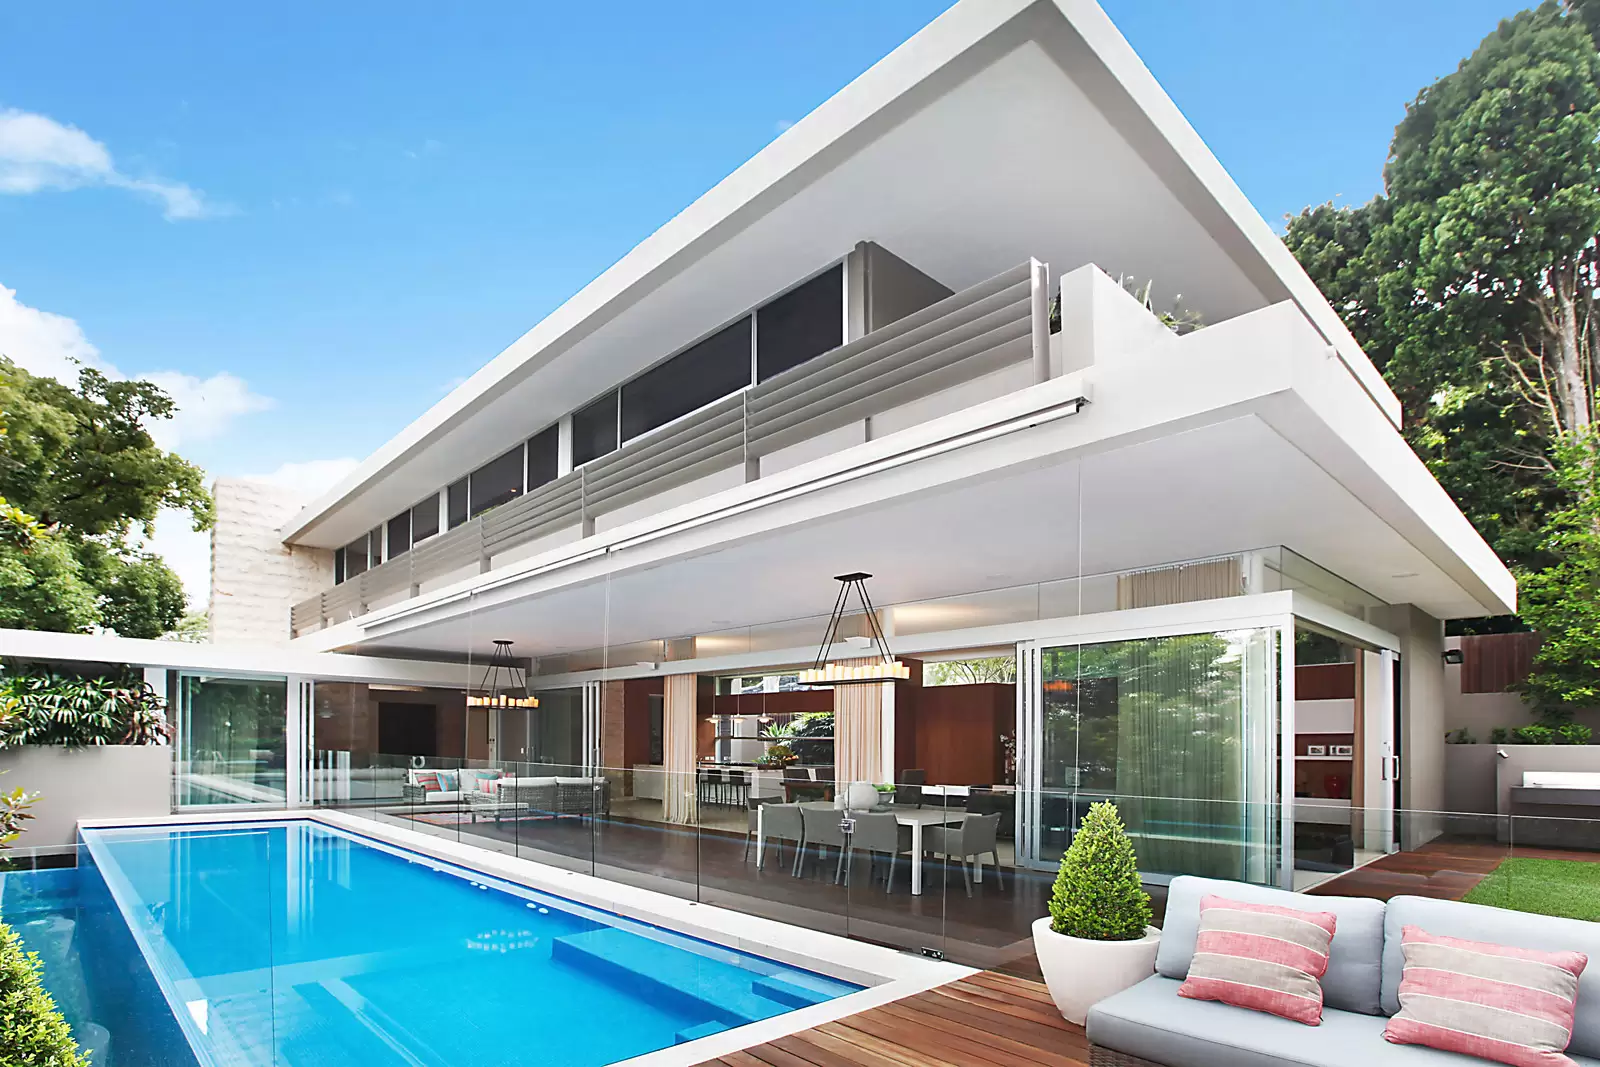 Photo #1: 20 Fitzwilliam Road, Vaucluse - Sold by Sydney Sotheby's International Realty